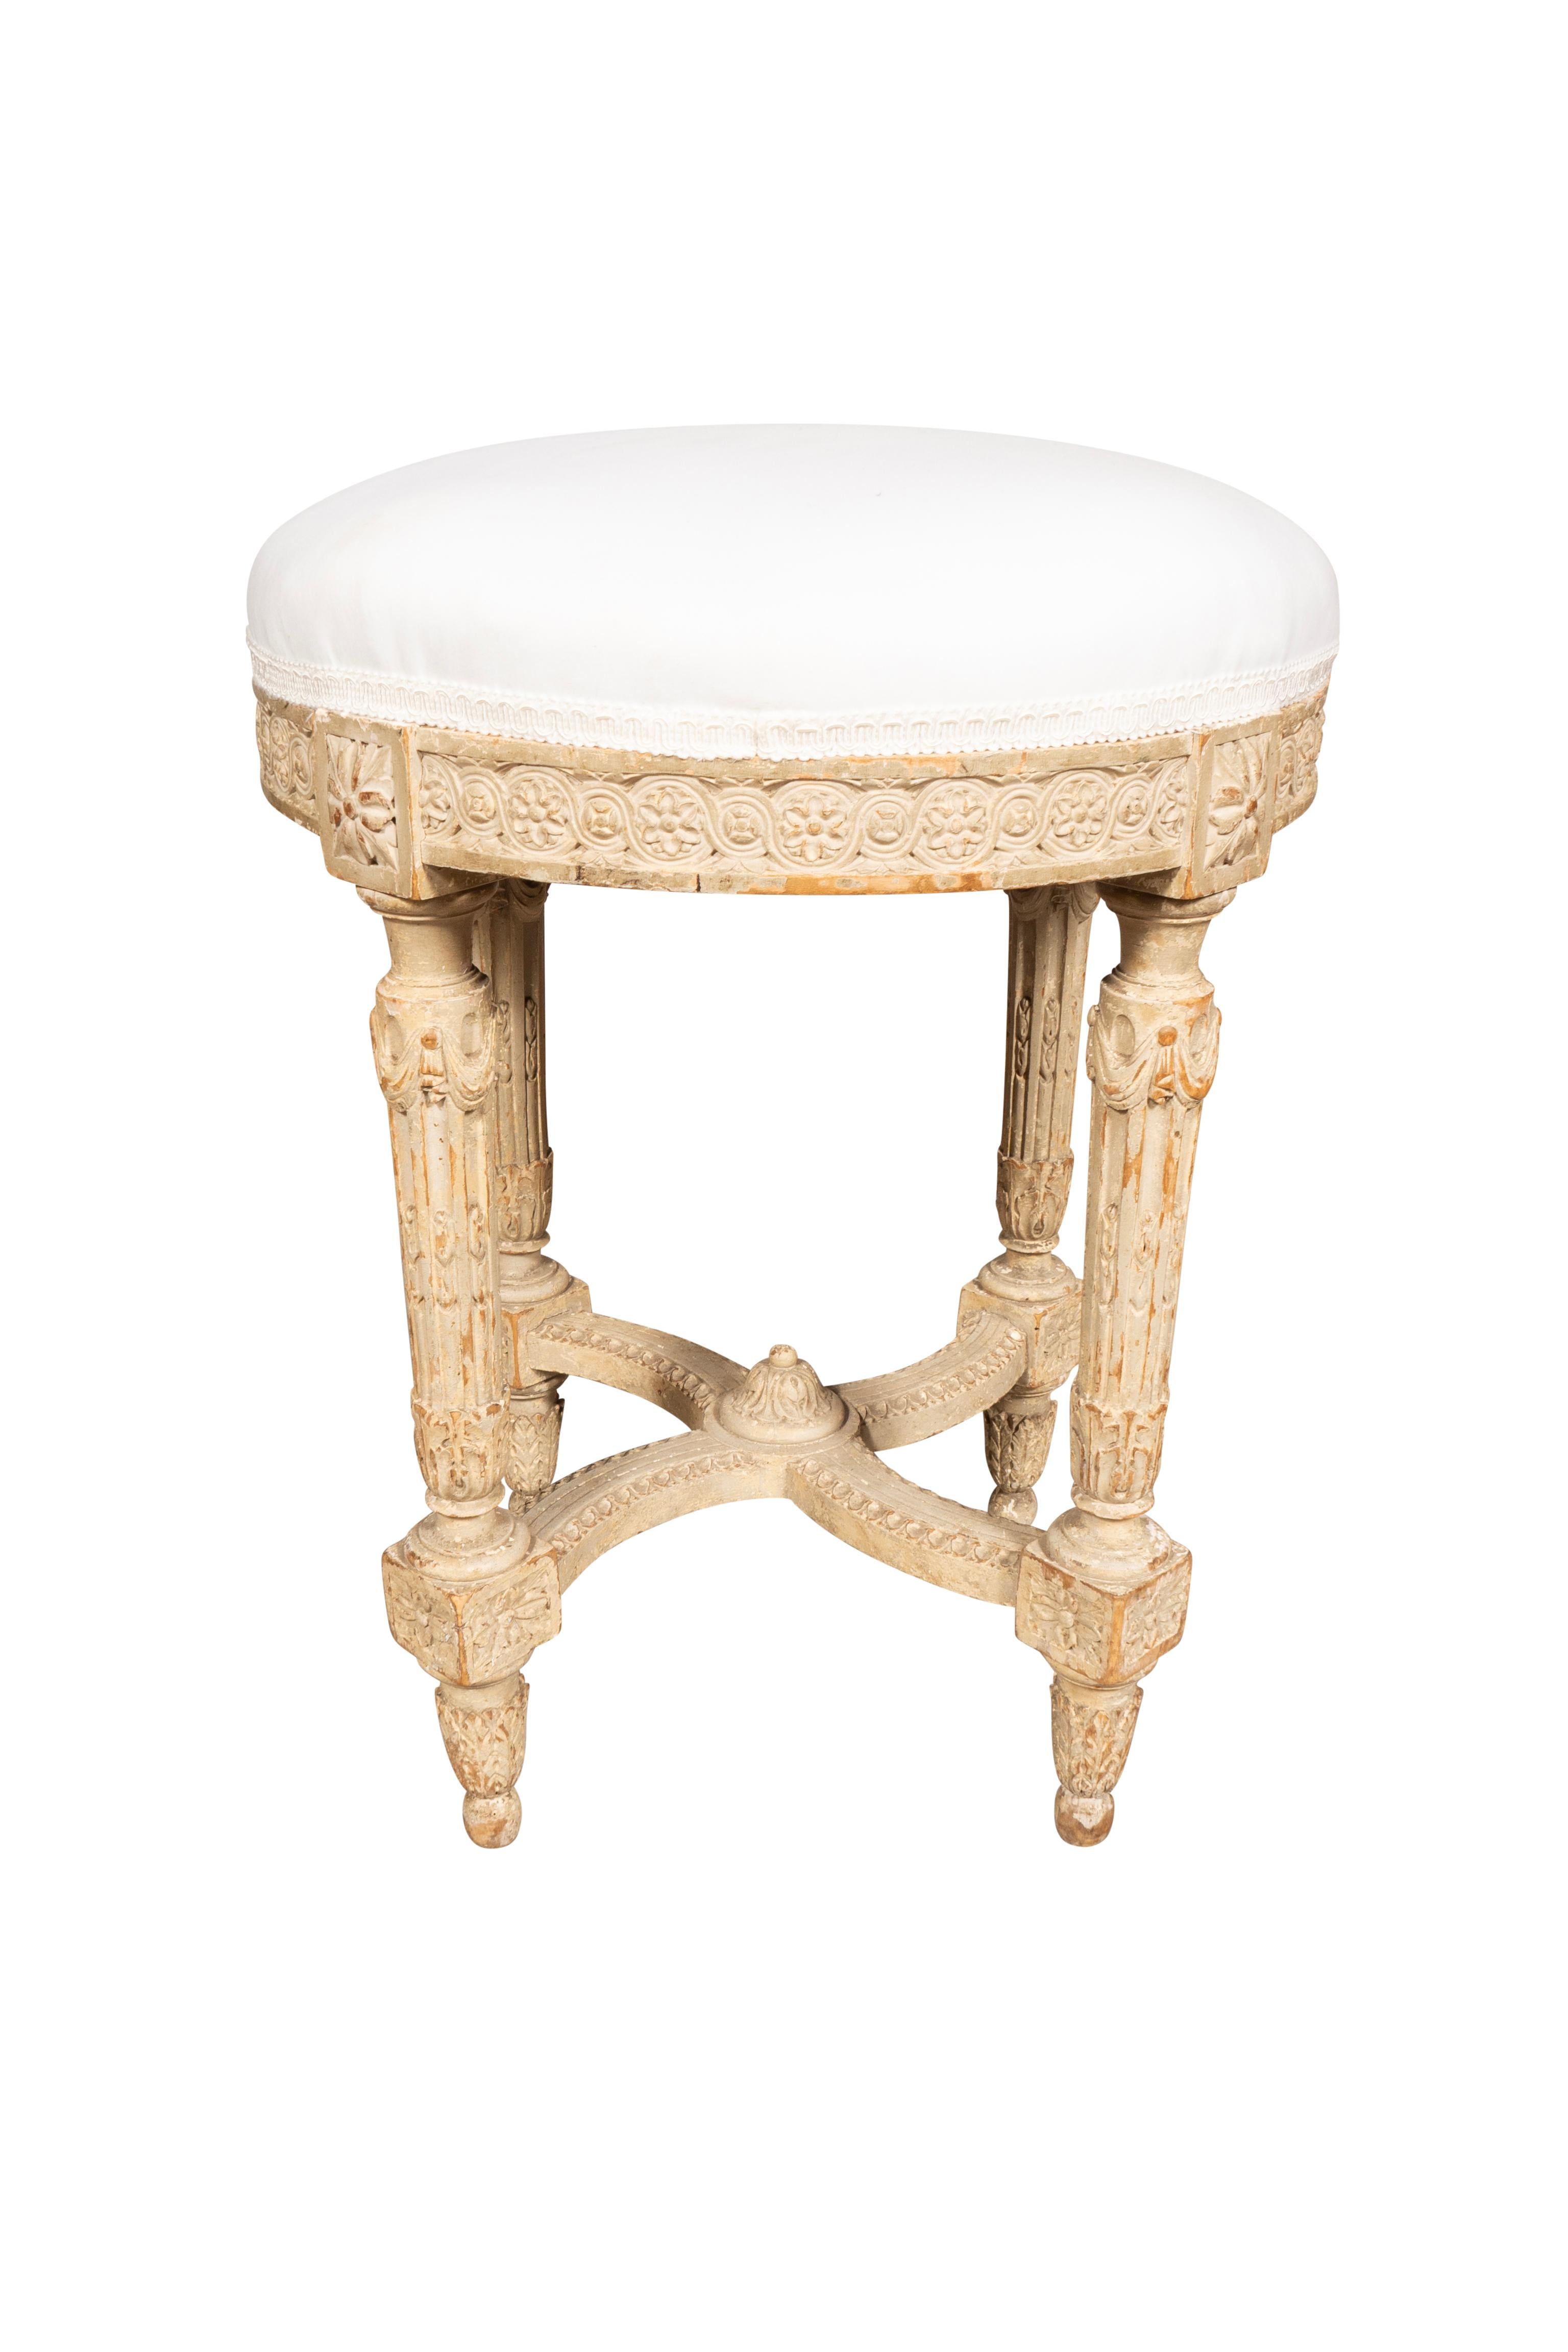 Louis XVI Style Creme Painted Tabouret In Good Condition For Sale In Essex, MA